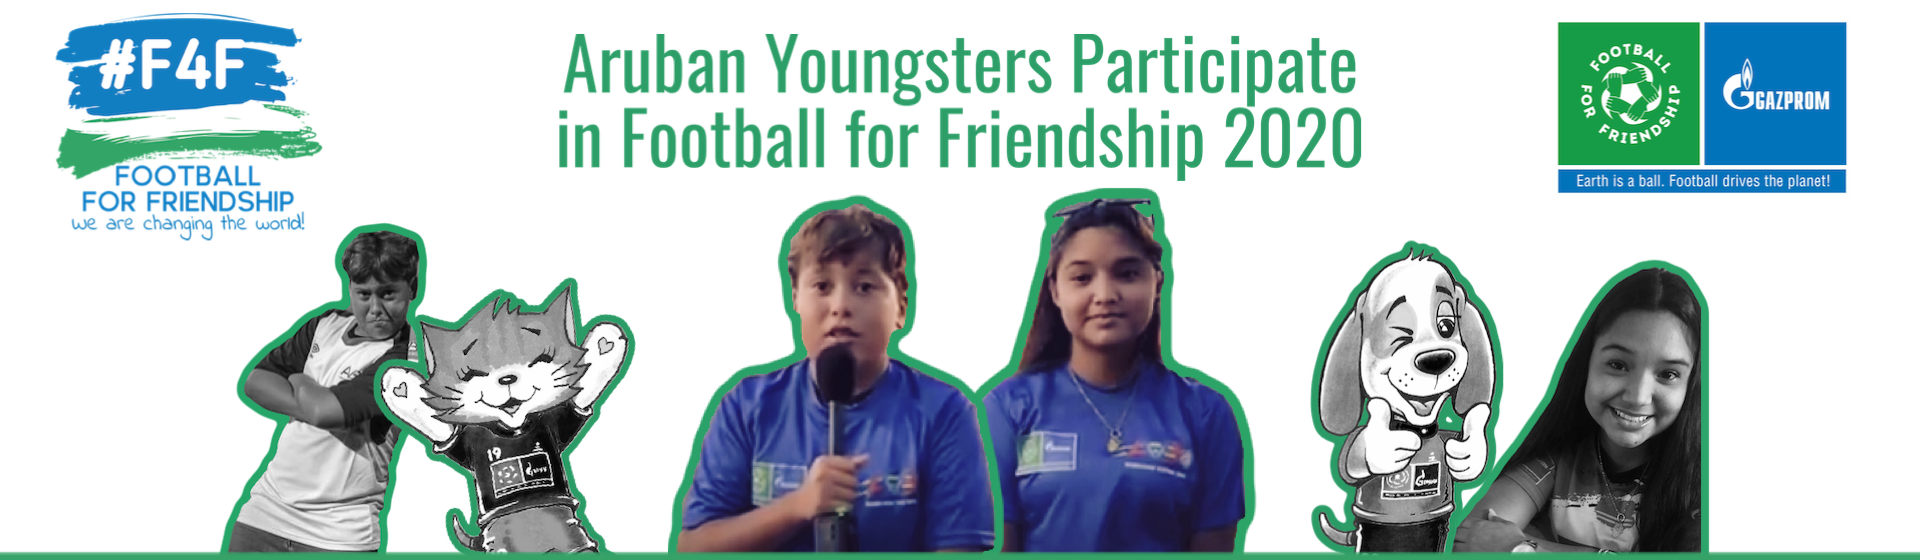 Caribbean News Global aruban-f4f Aruban youngsters participate in Football for Friendship 2020  